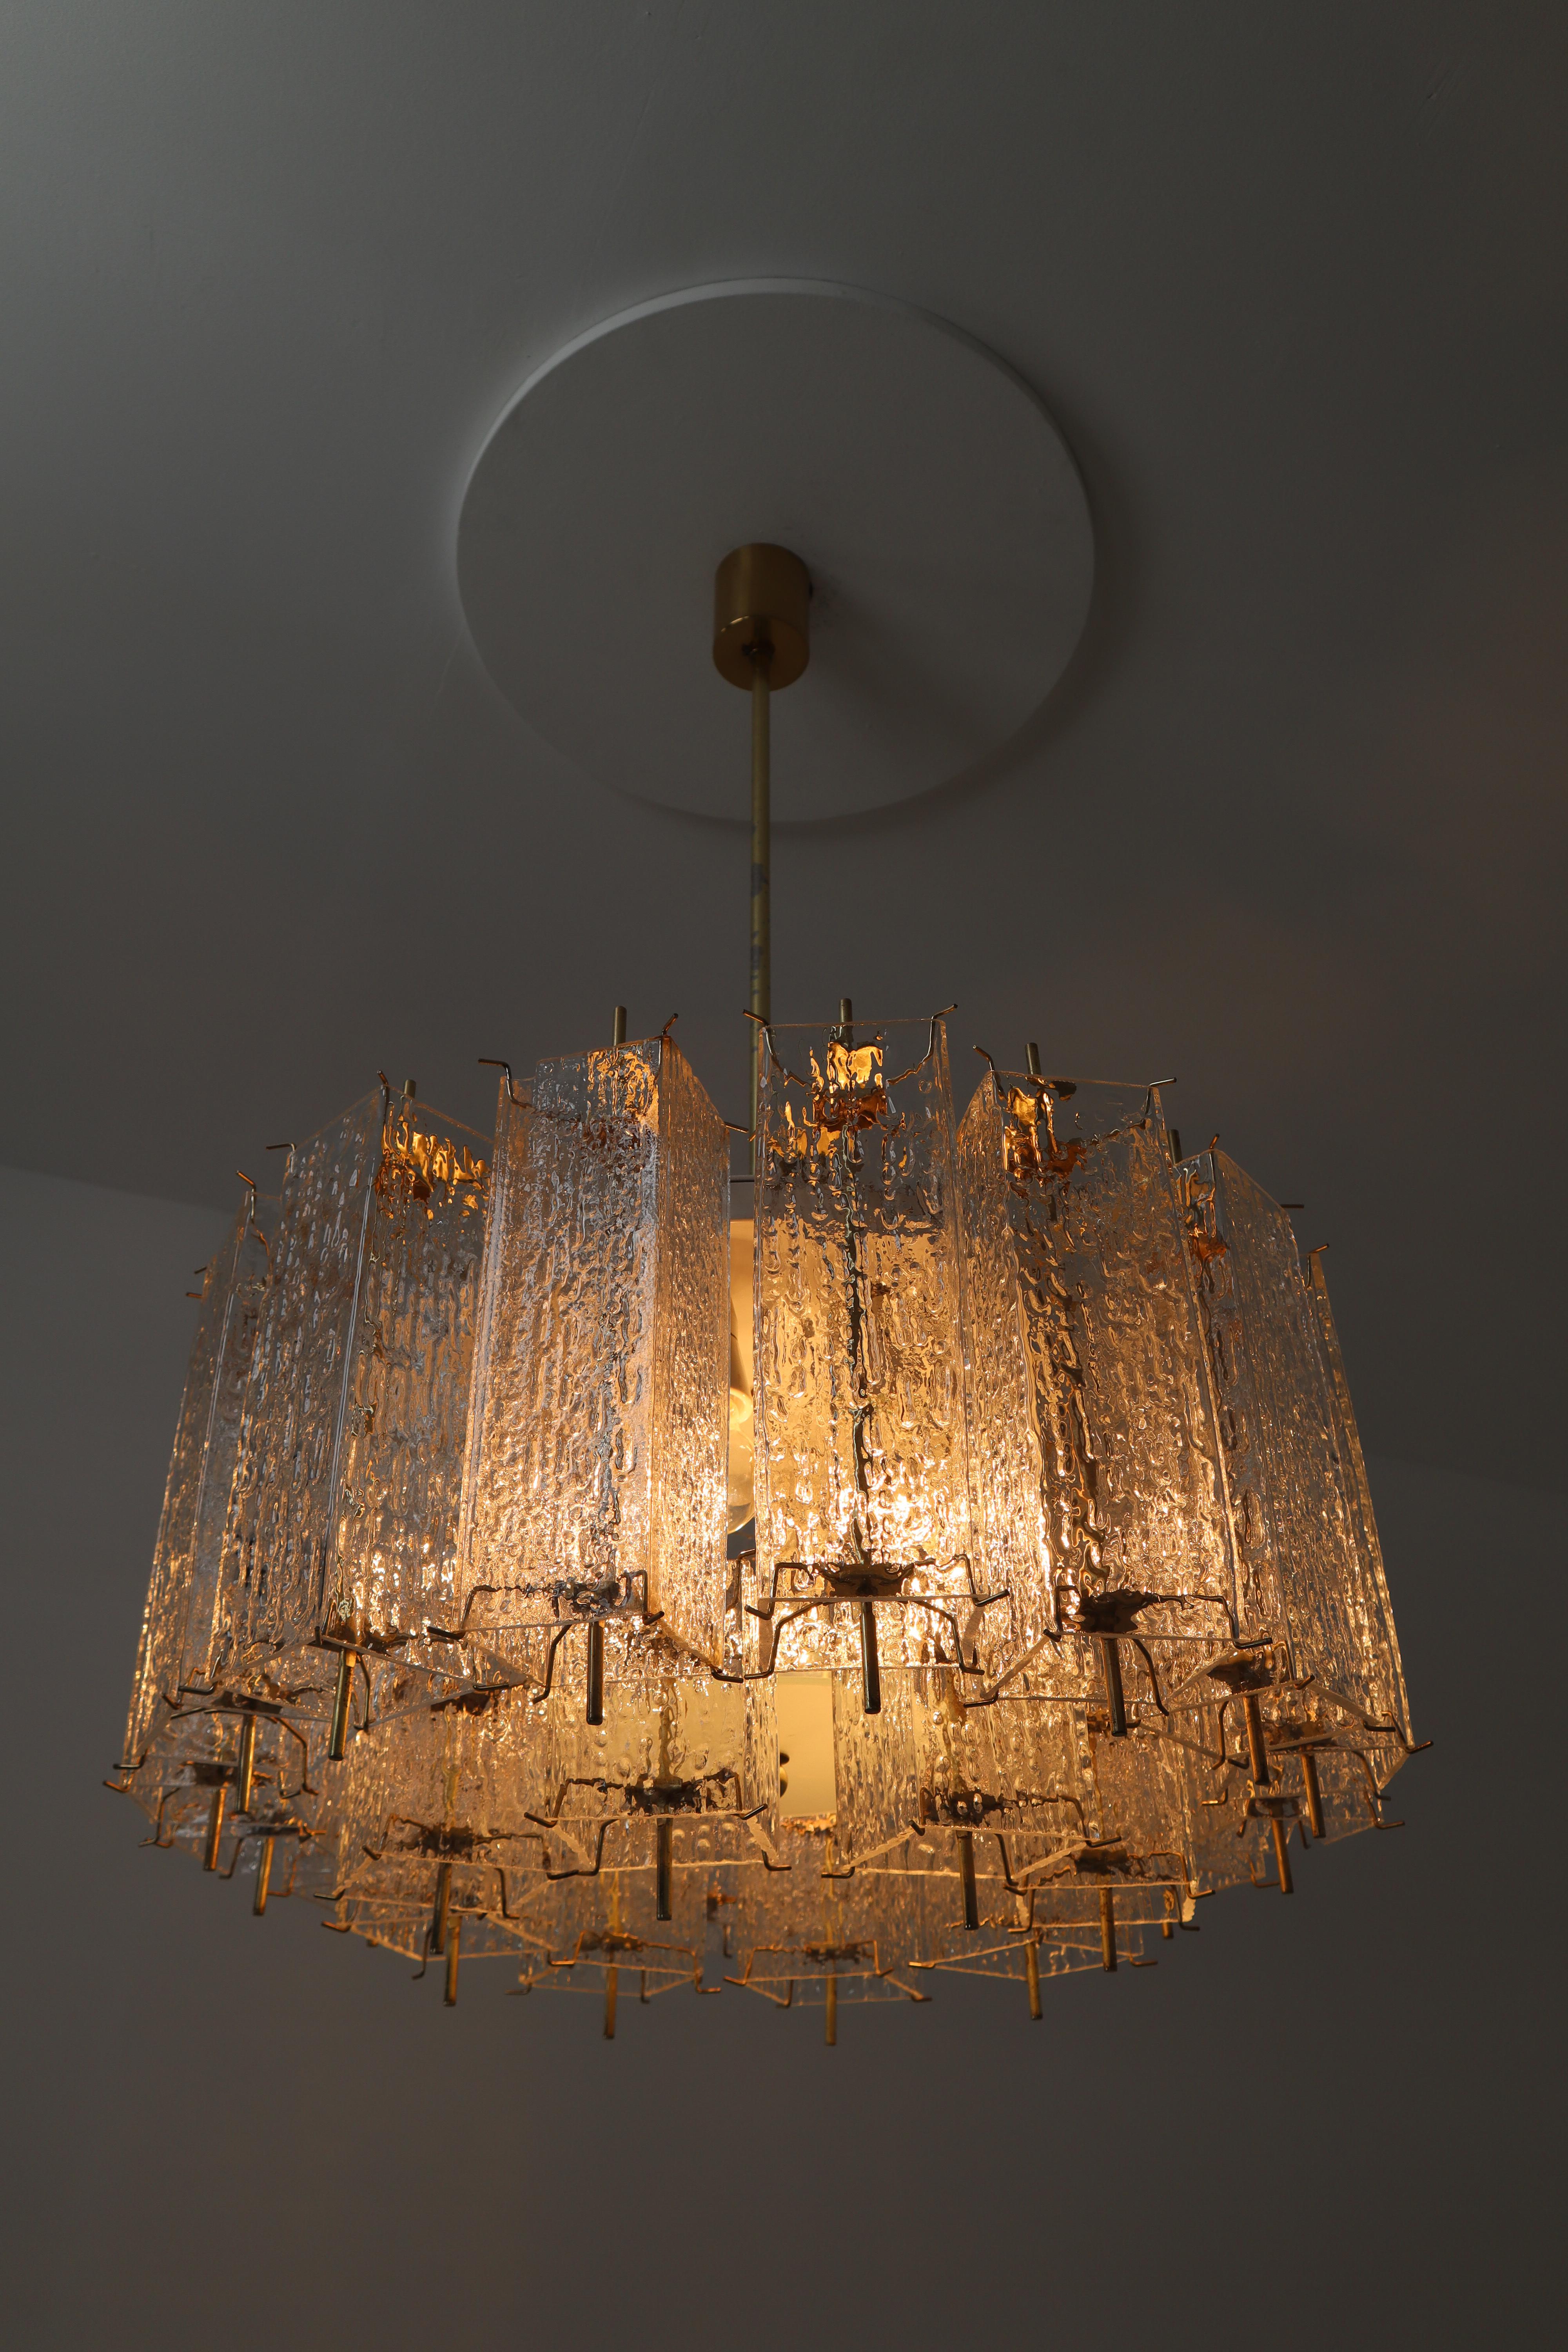 Large Midcentury Chandelier with Ice Glass Tubes in Brass Fixture Europe, 1960s For Sale 5